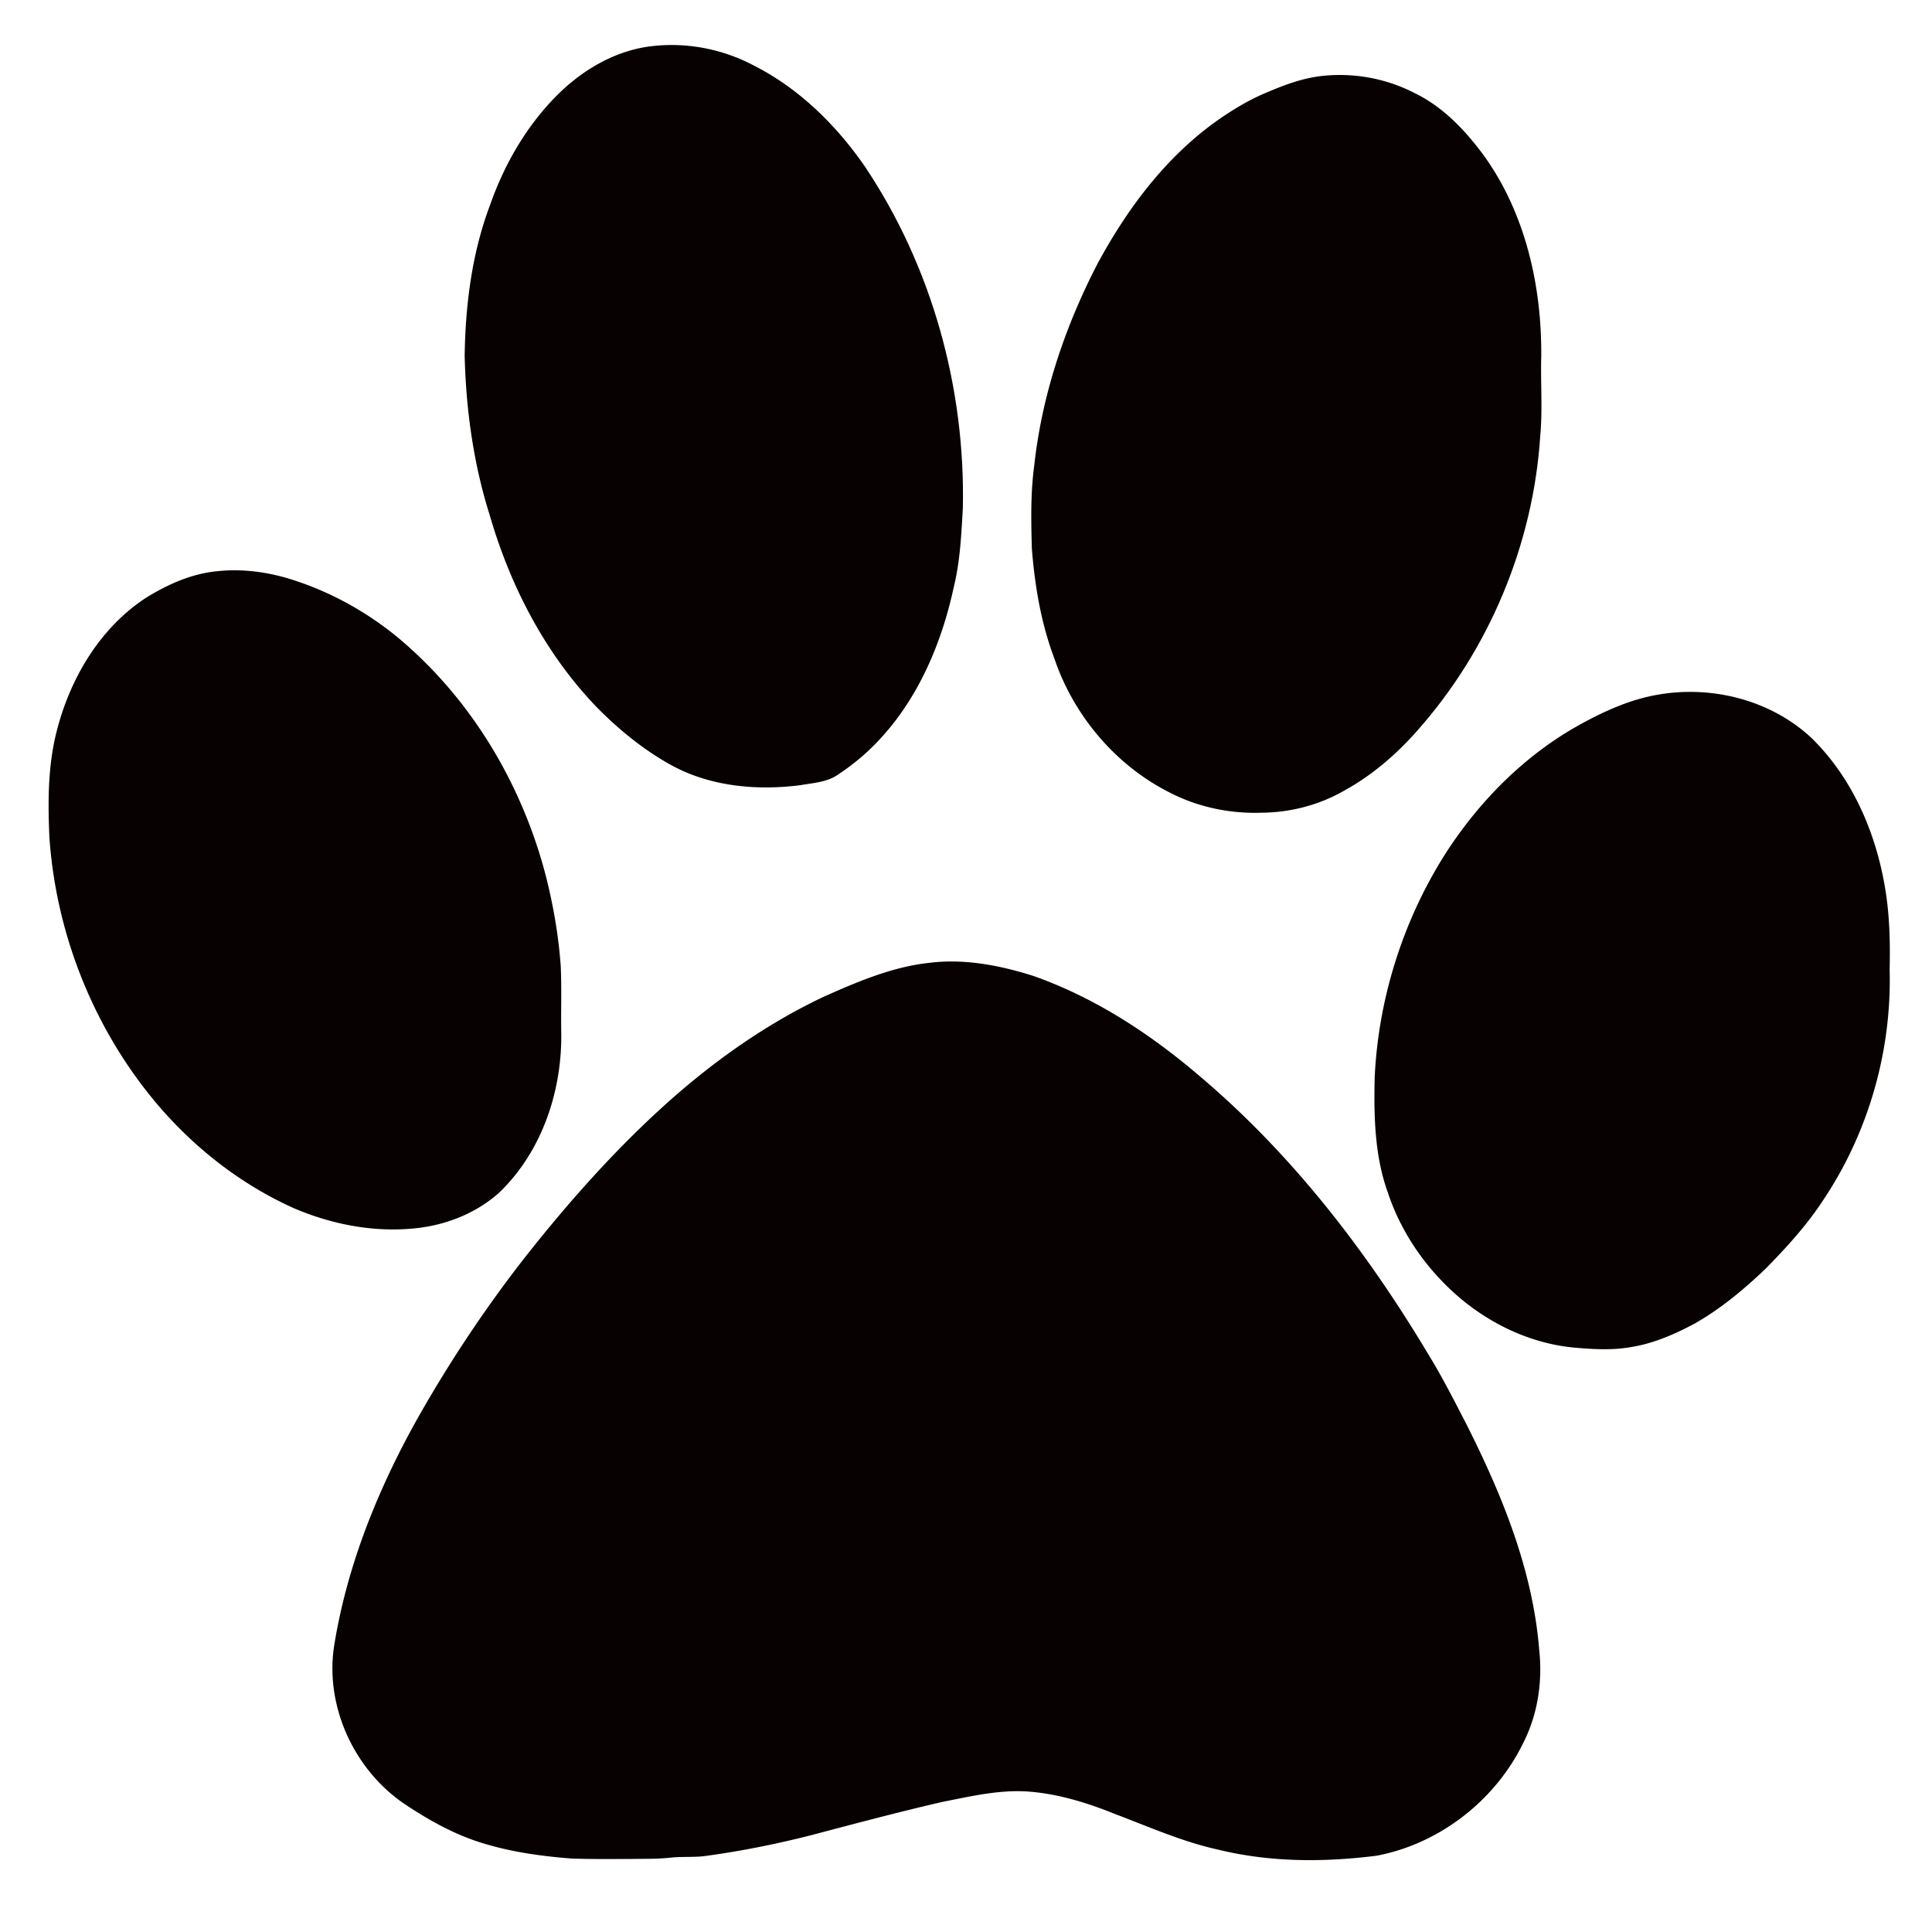 Pawprint clipart. Panther paw print clip